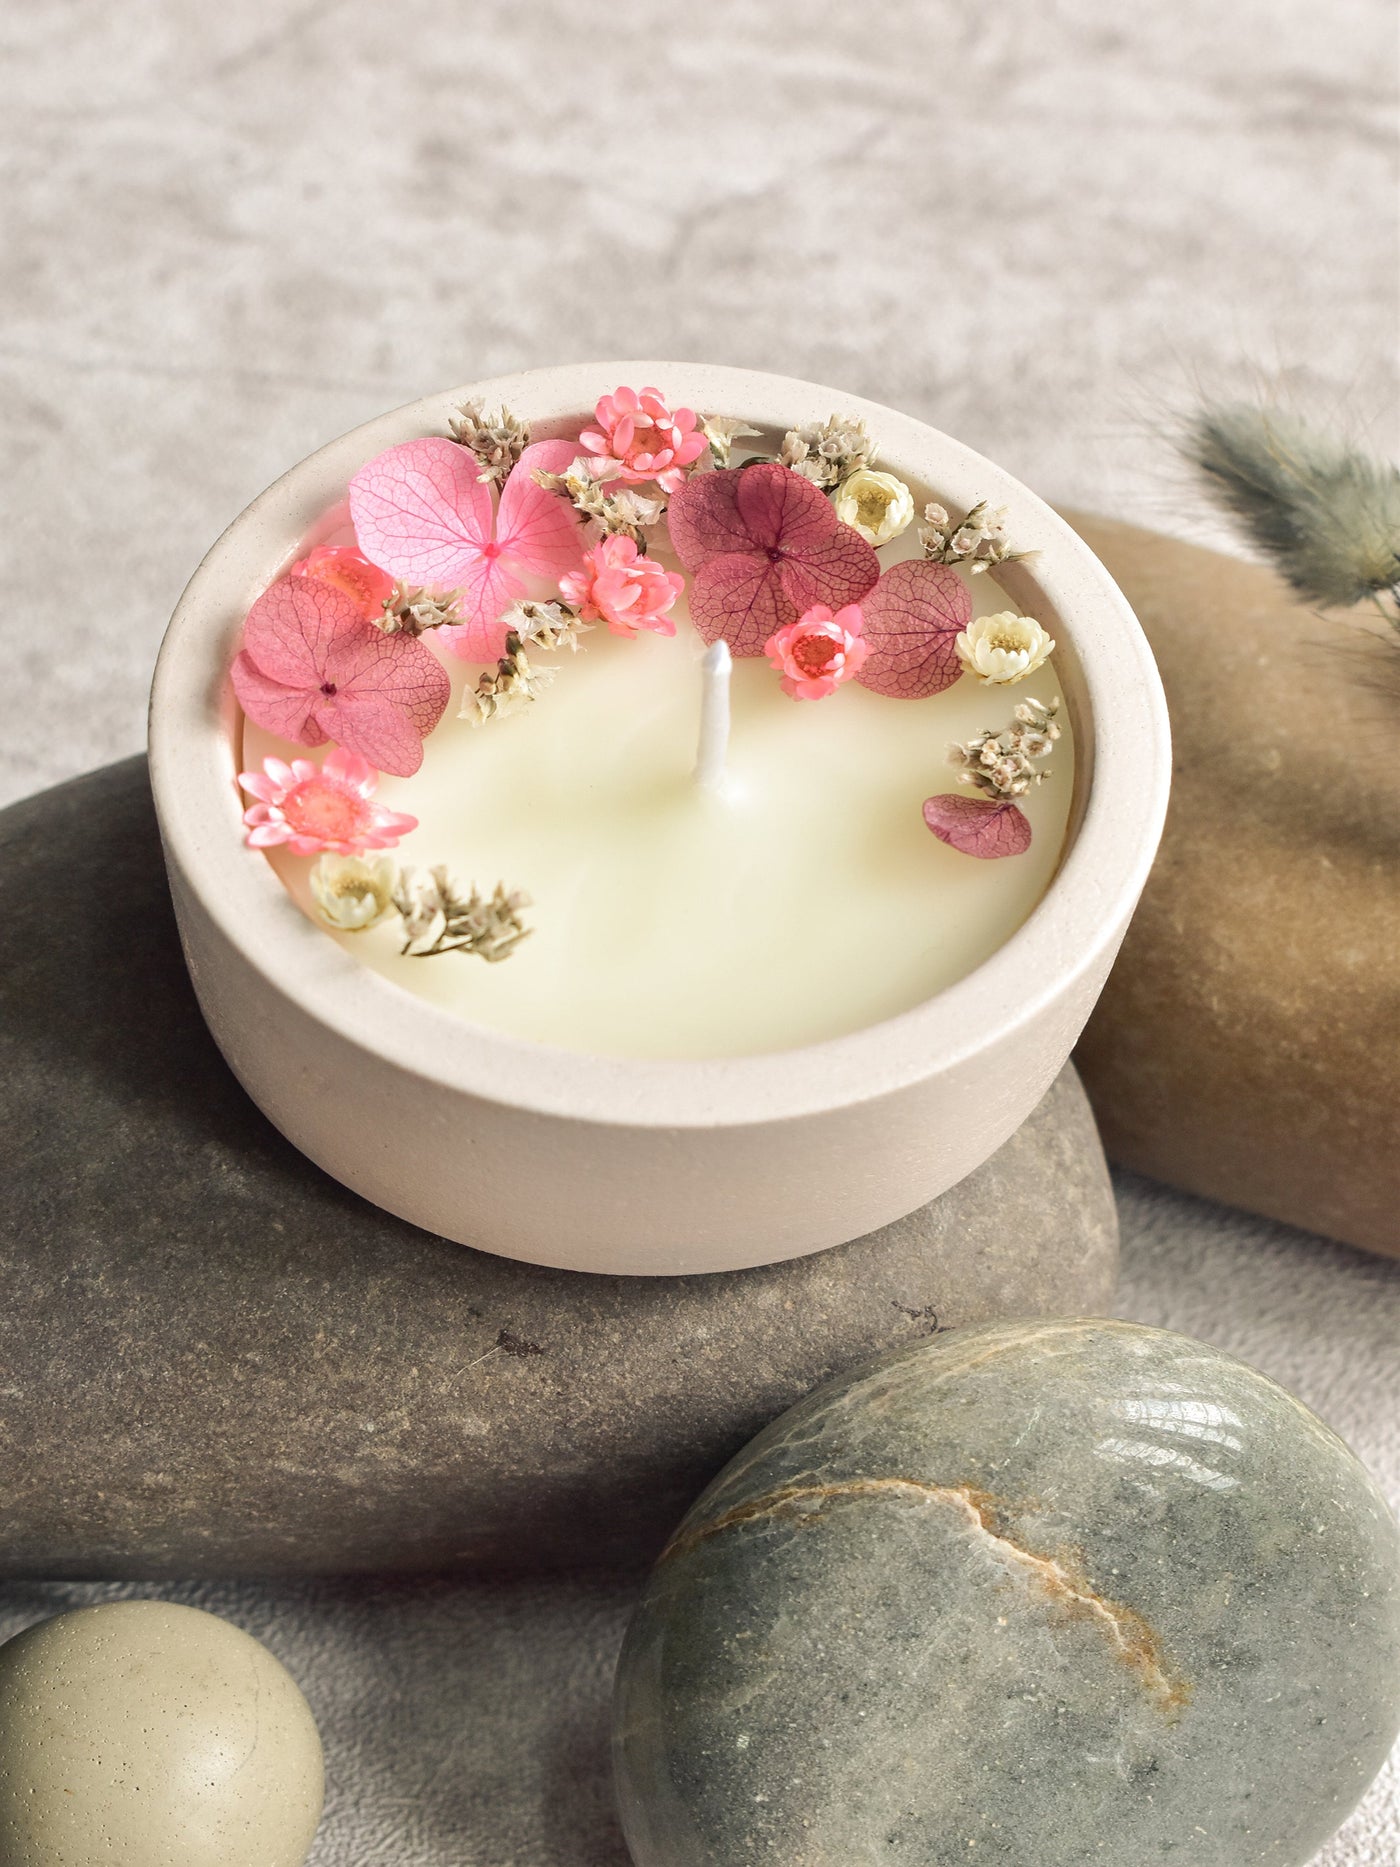 Dryflower & Soy Wax Candle In Small Concrete Jar